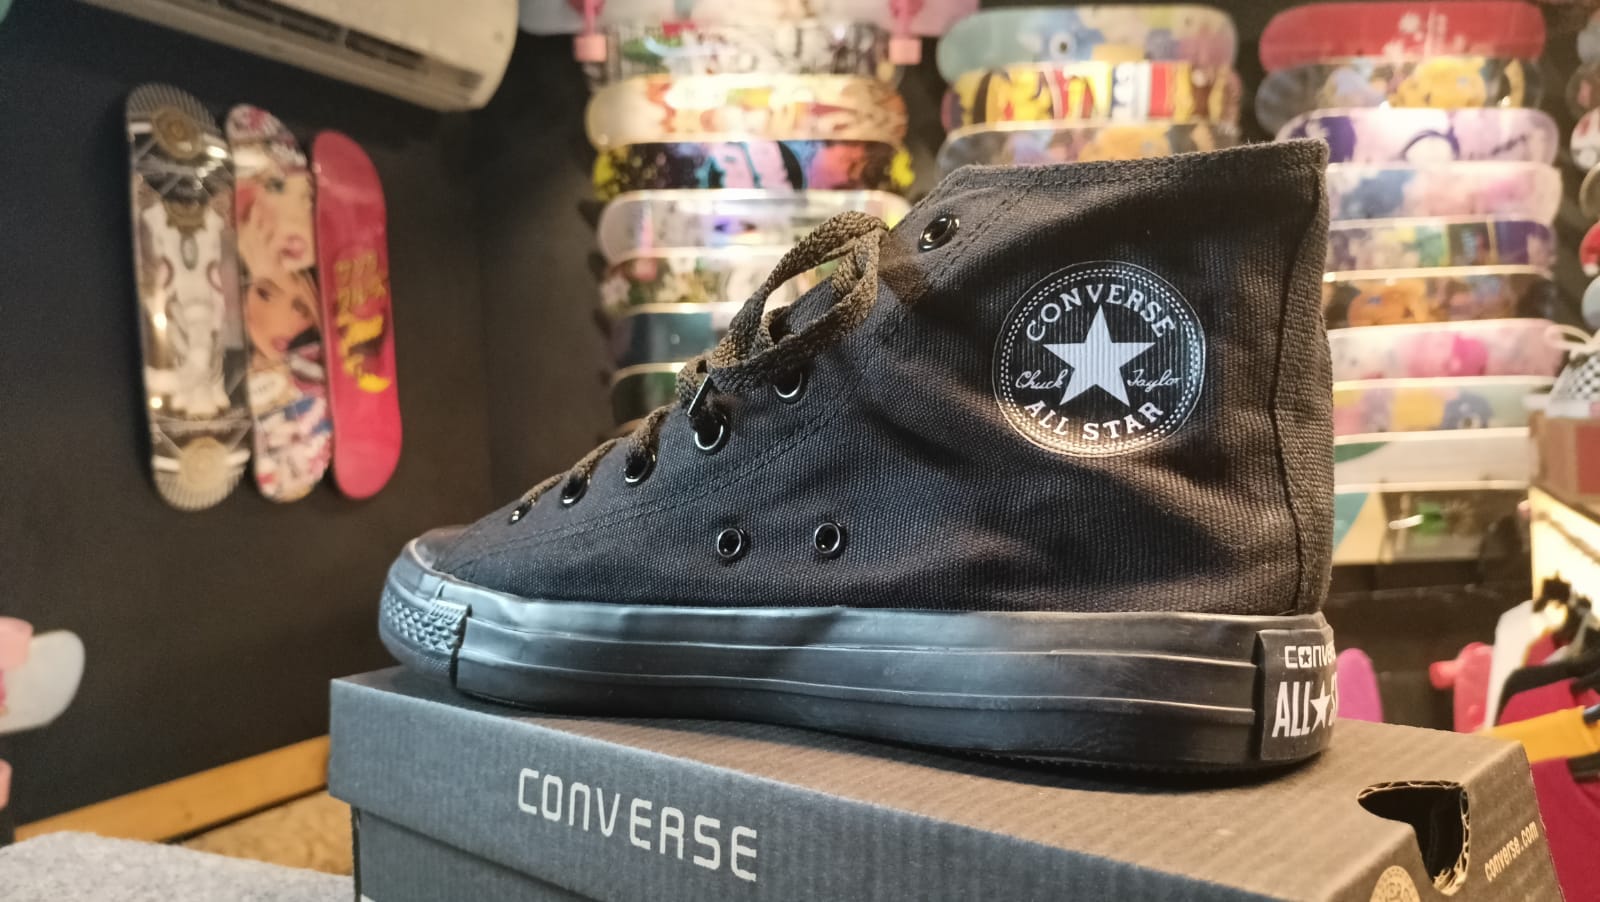 The beauty of the Converse skate sneakers is that they come in many colors and designs to help customize your look.